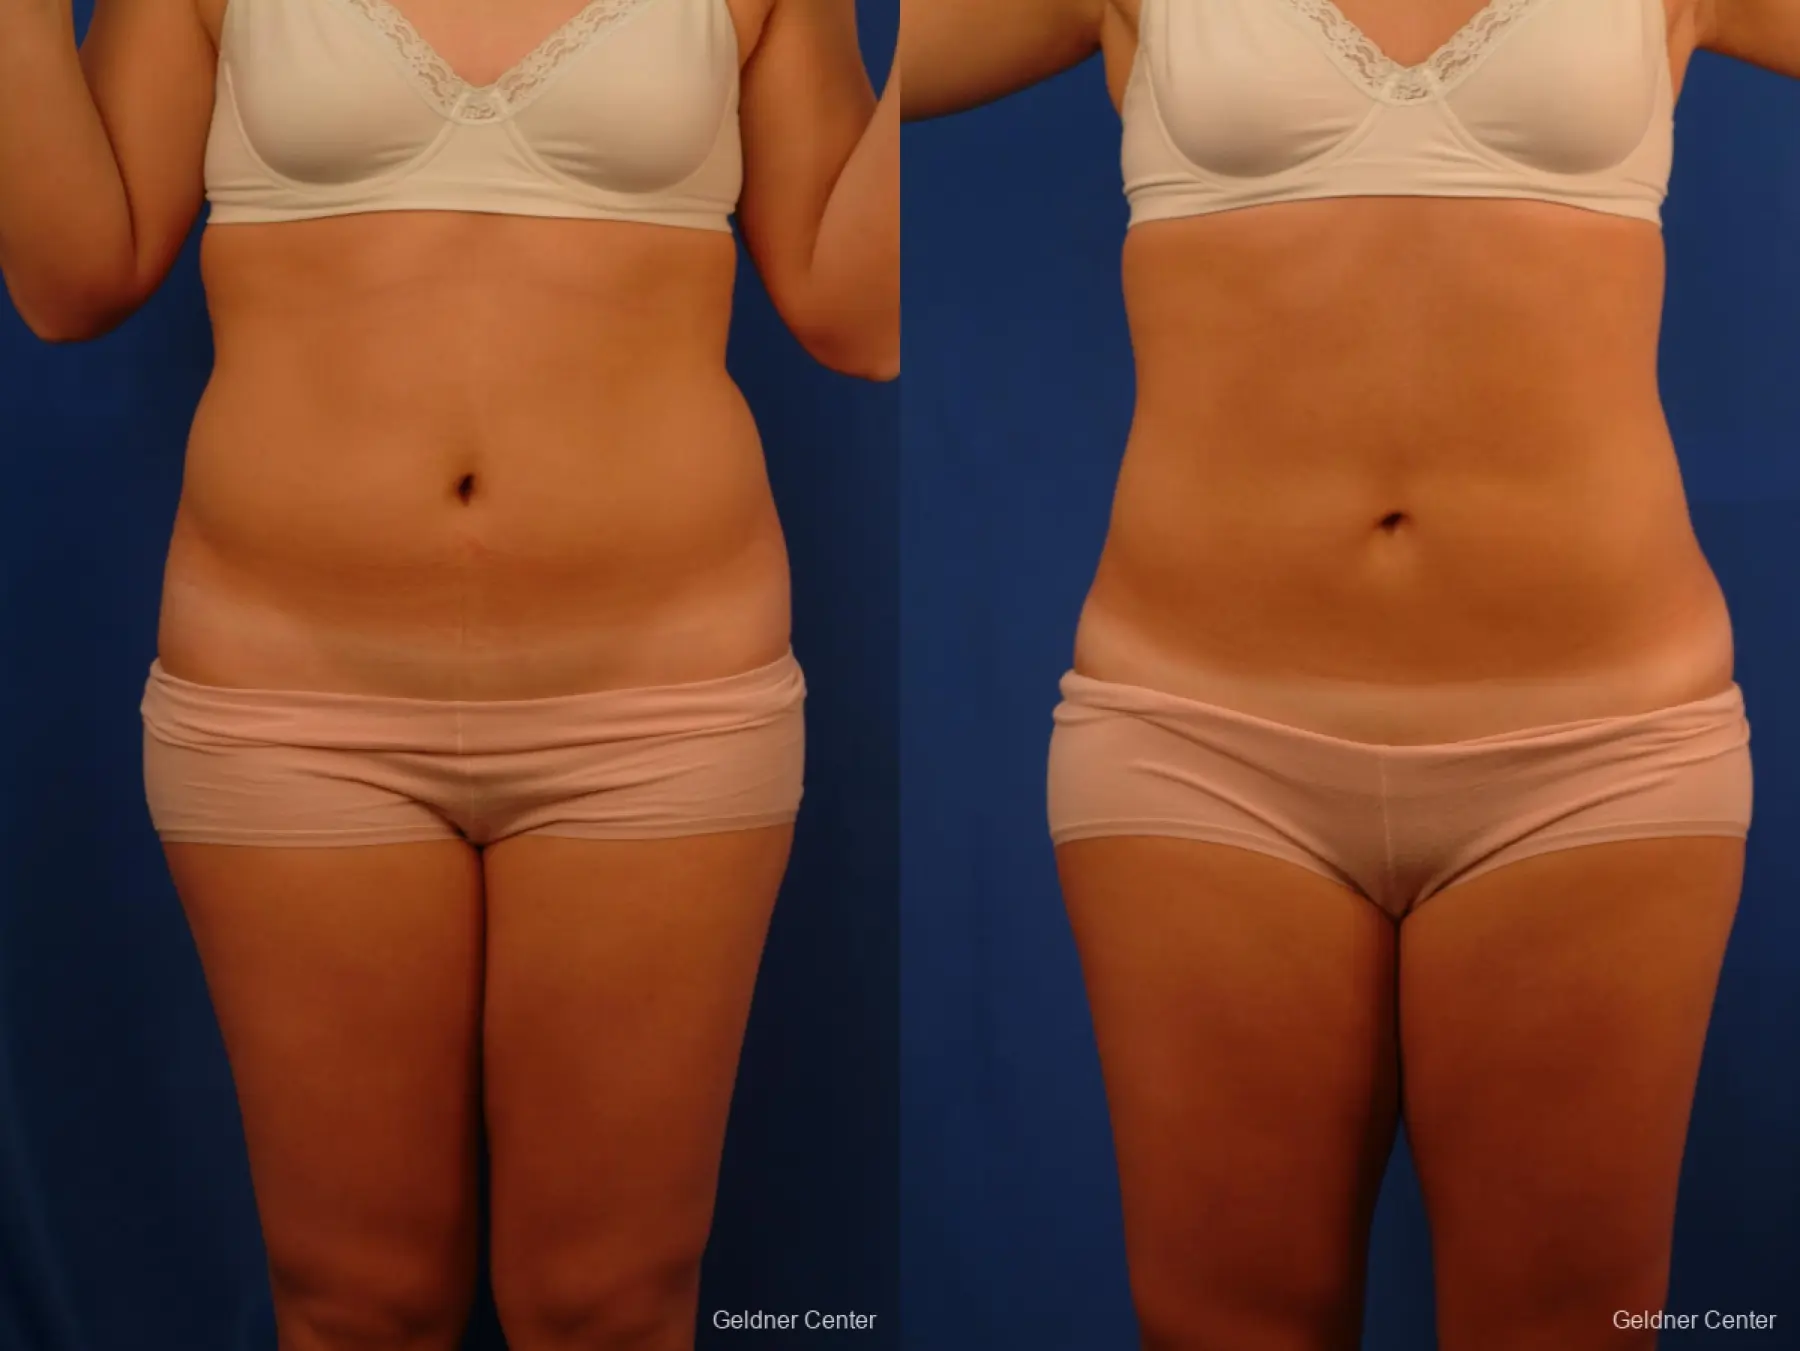 Vaser lipo patient 2514 before and after photos - Before and After 1